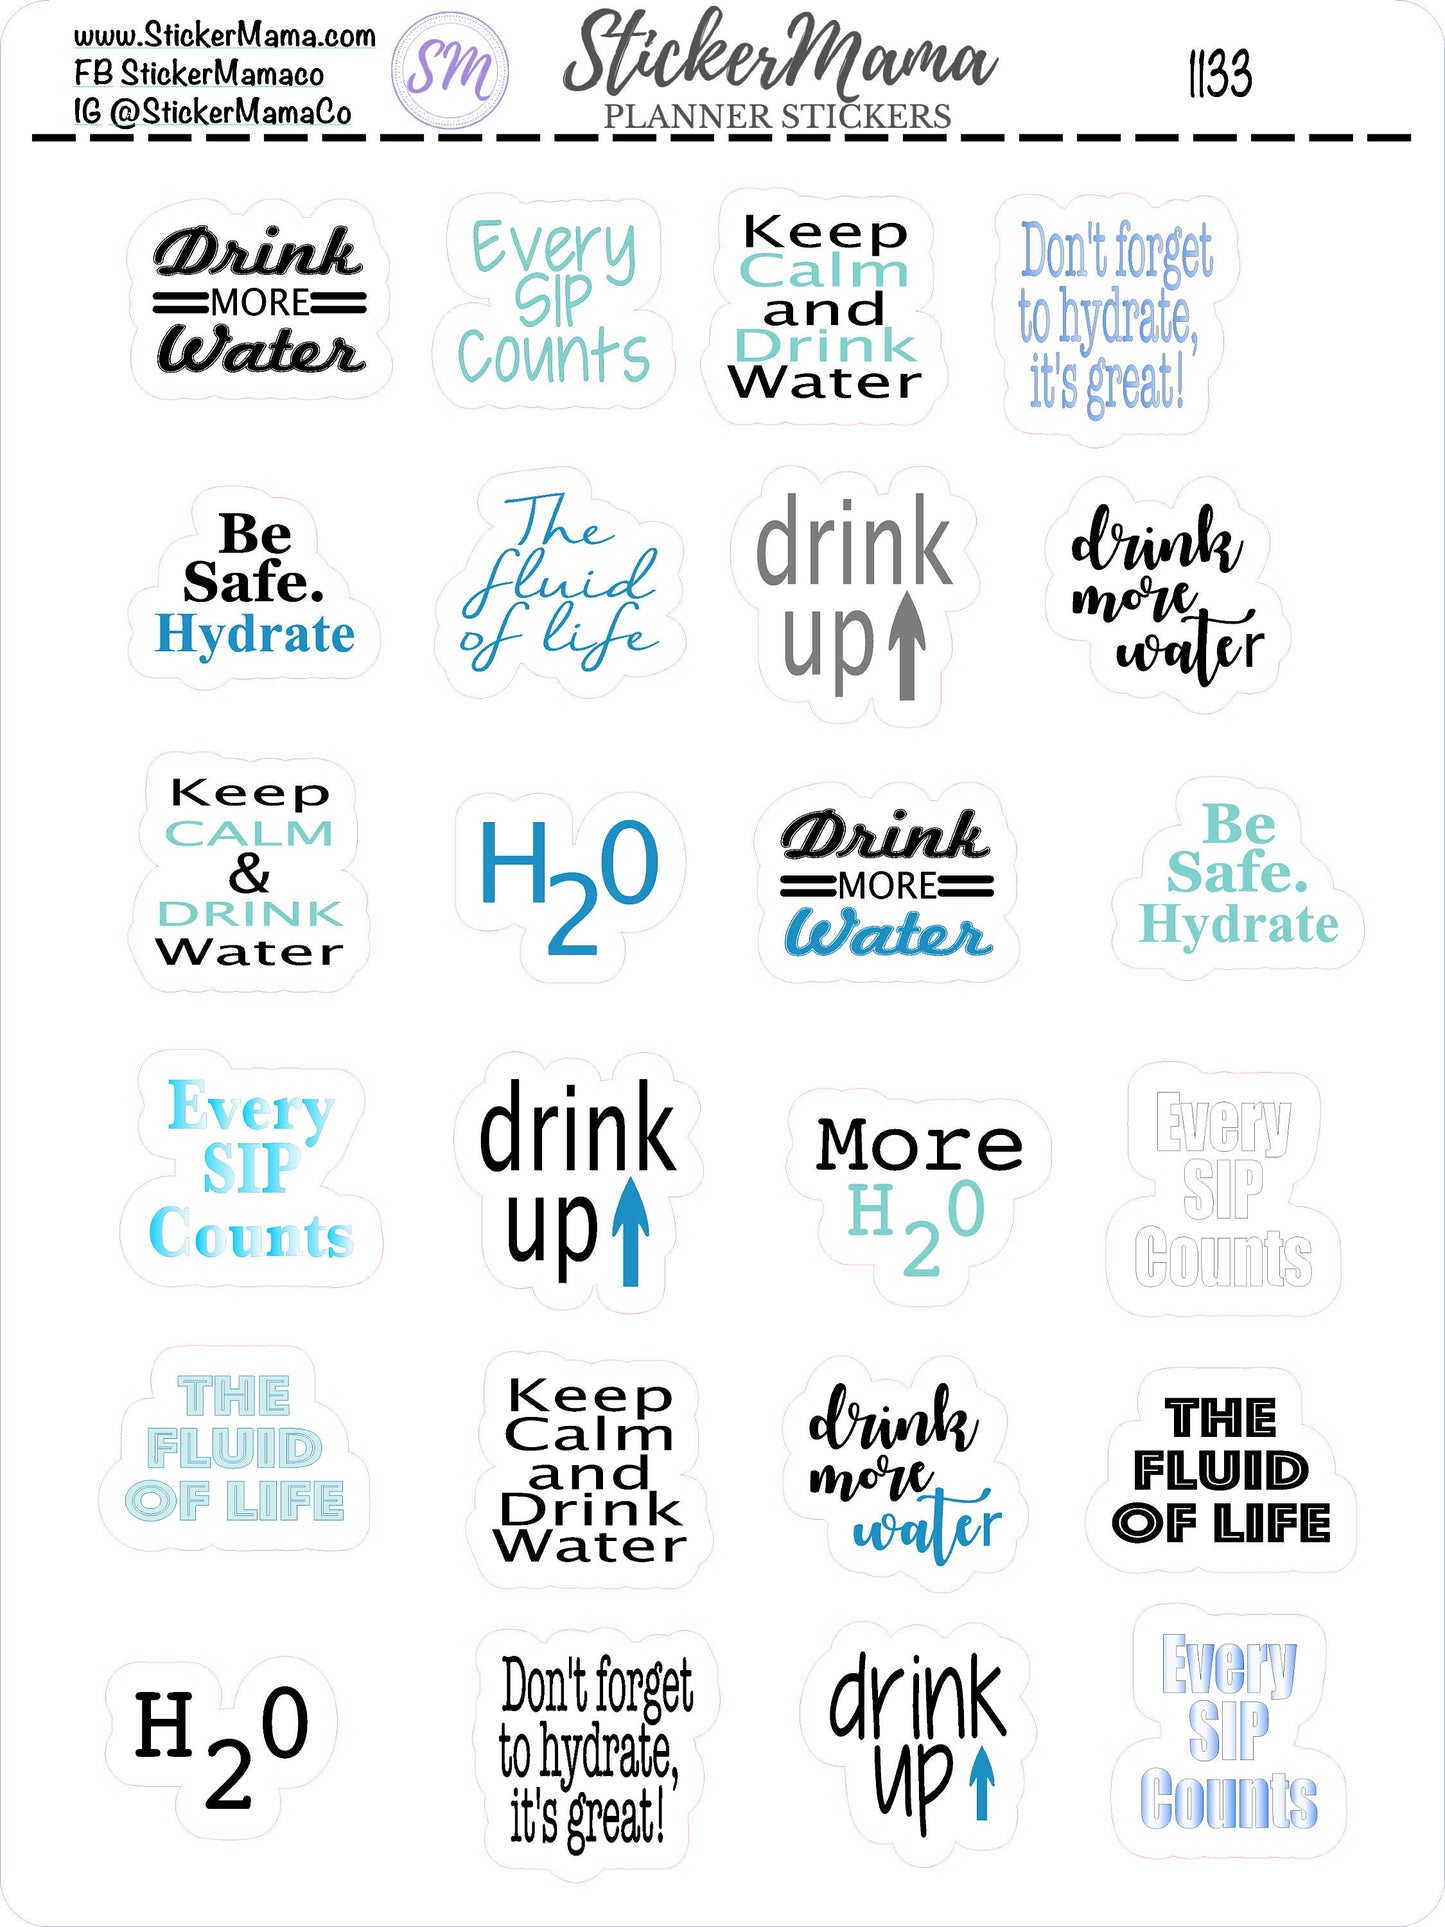 HYDRATE STICKERS 1132 1133 Planner Stickers Water Intake Stickers H20 Stickers Water Quote Planner Stickers